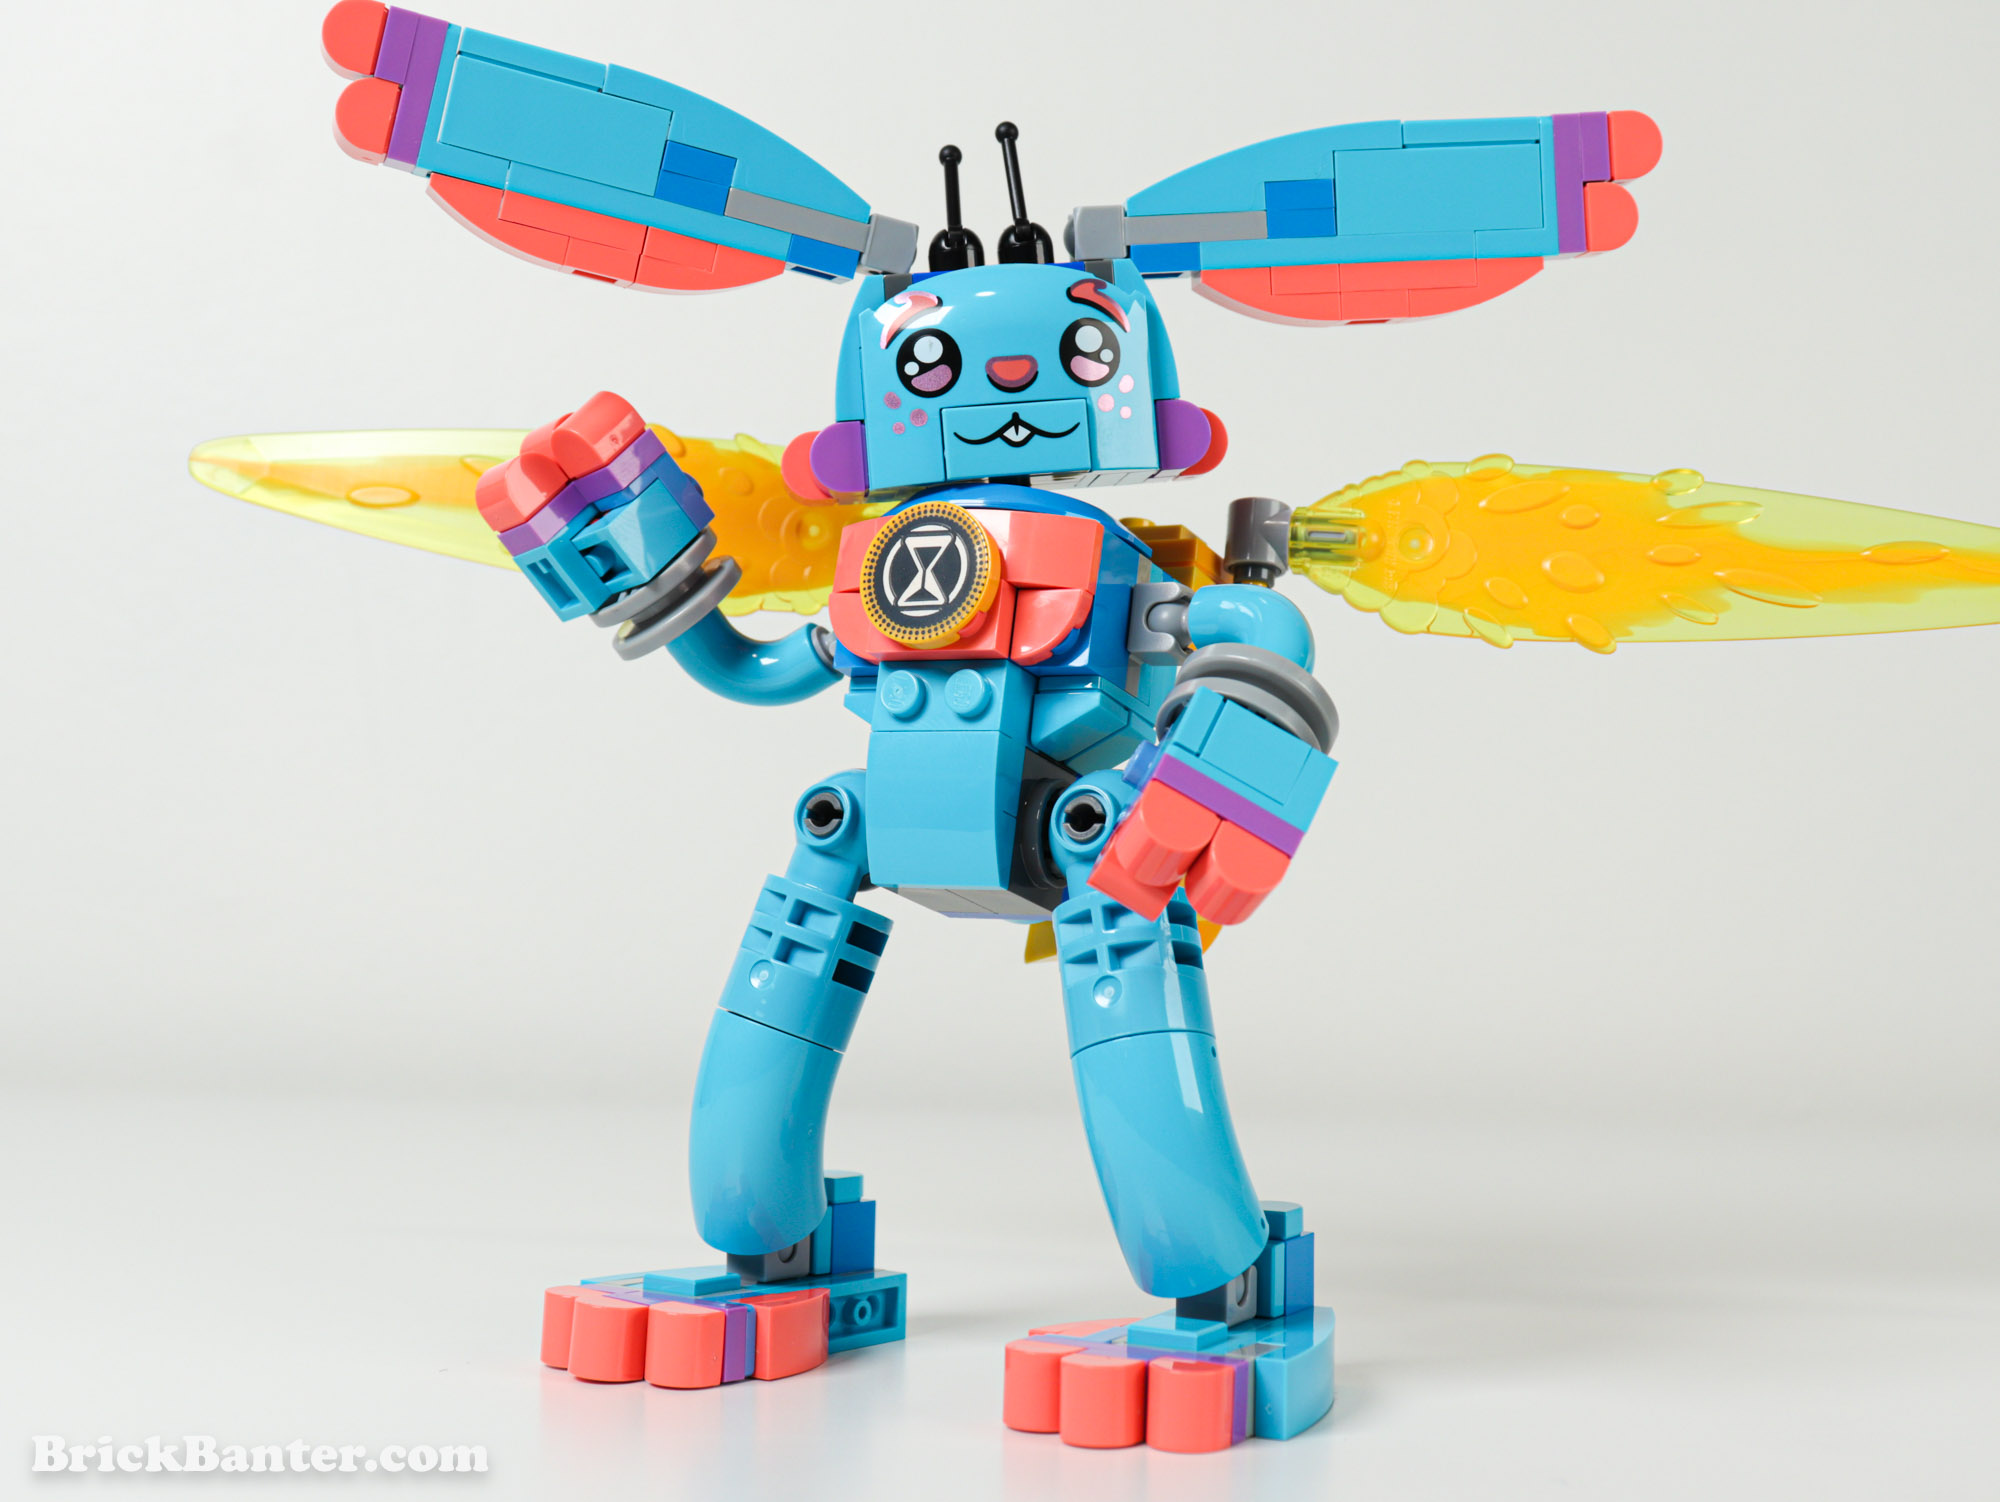 LEGO® parts and minifigures review: LEGO® DREAMZzz™